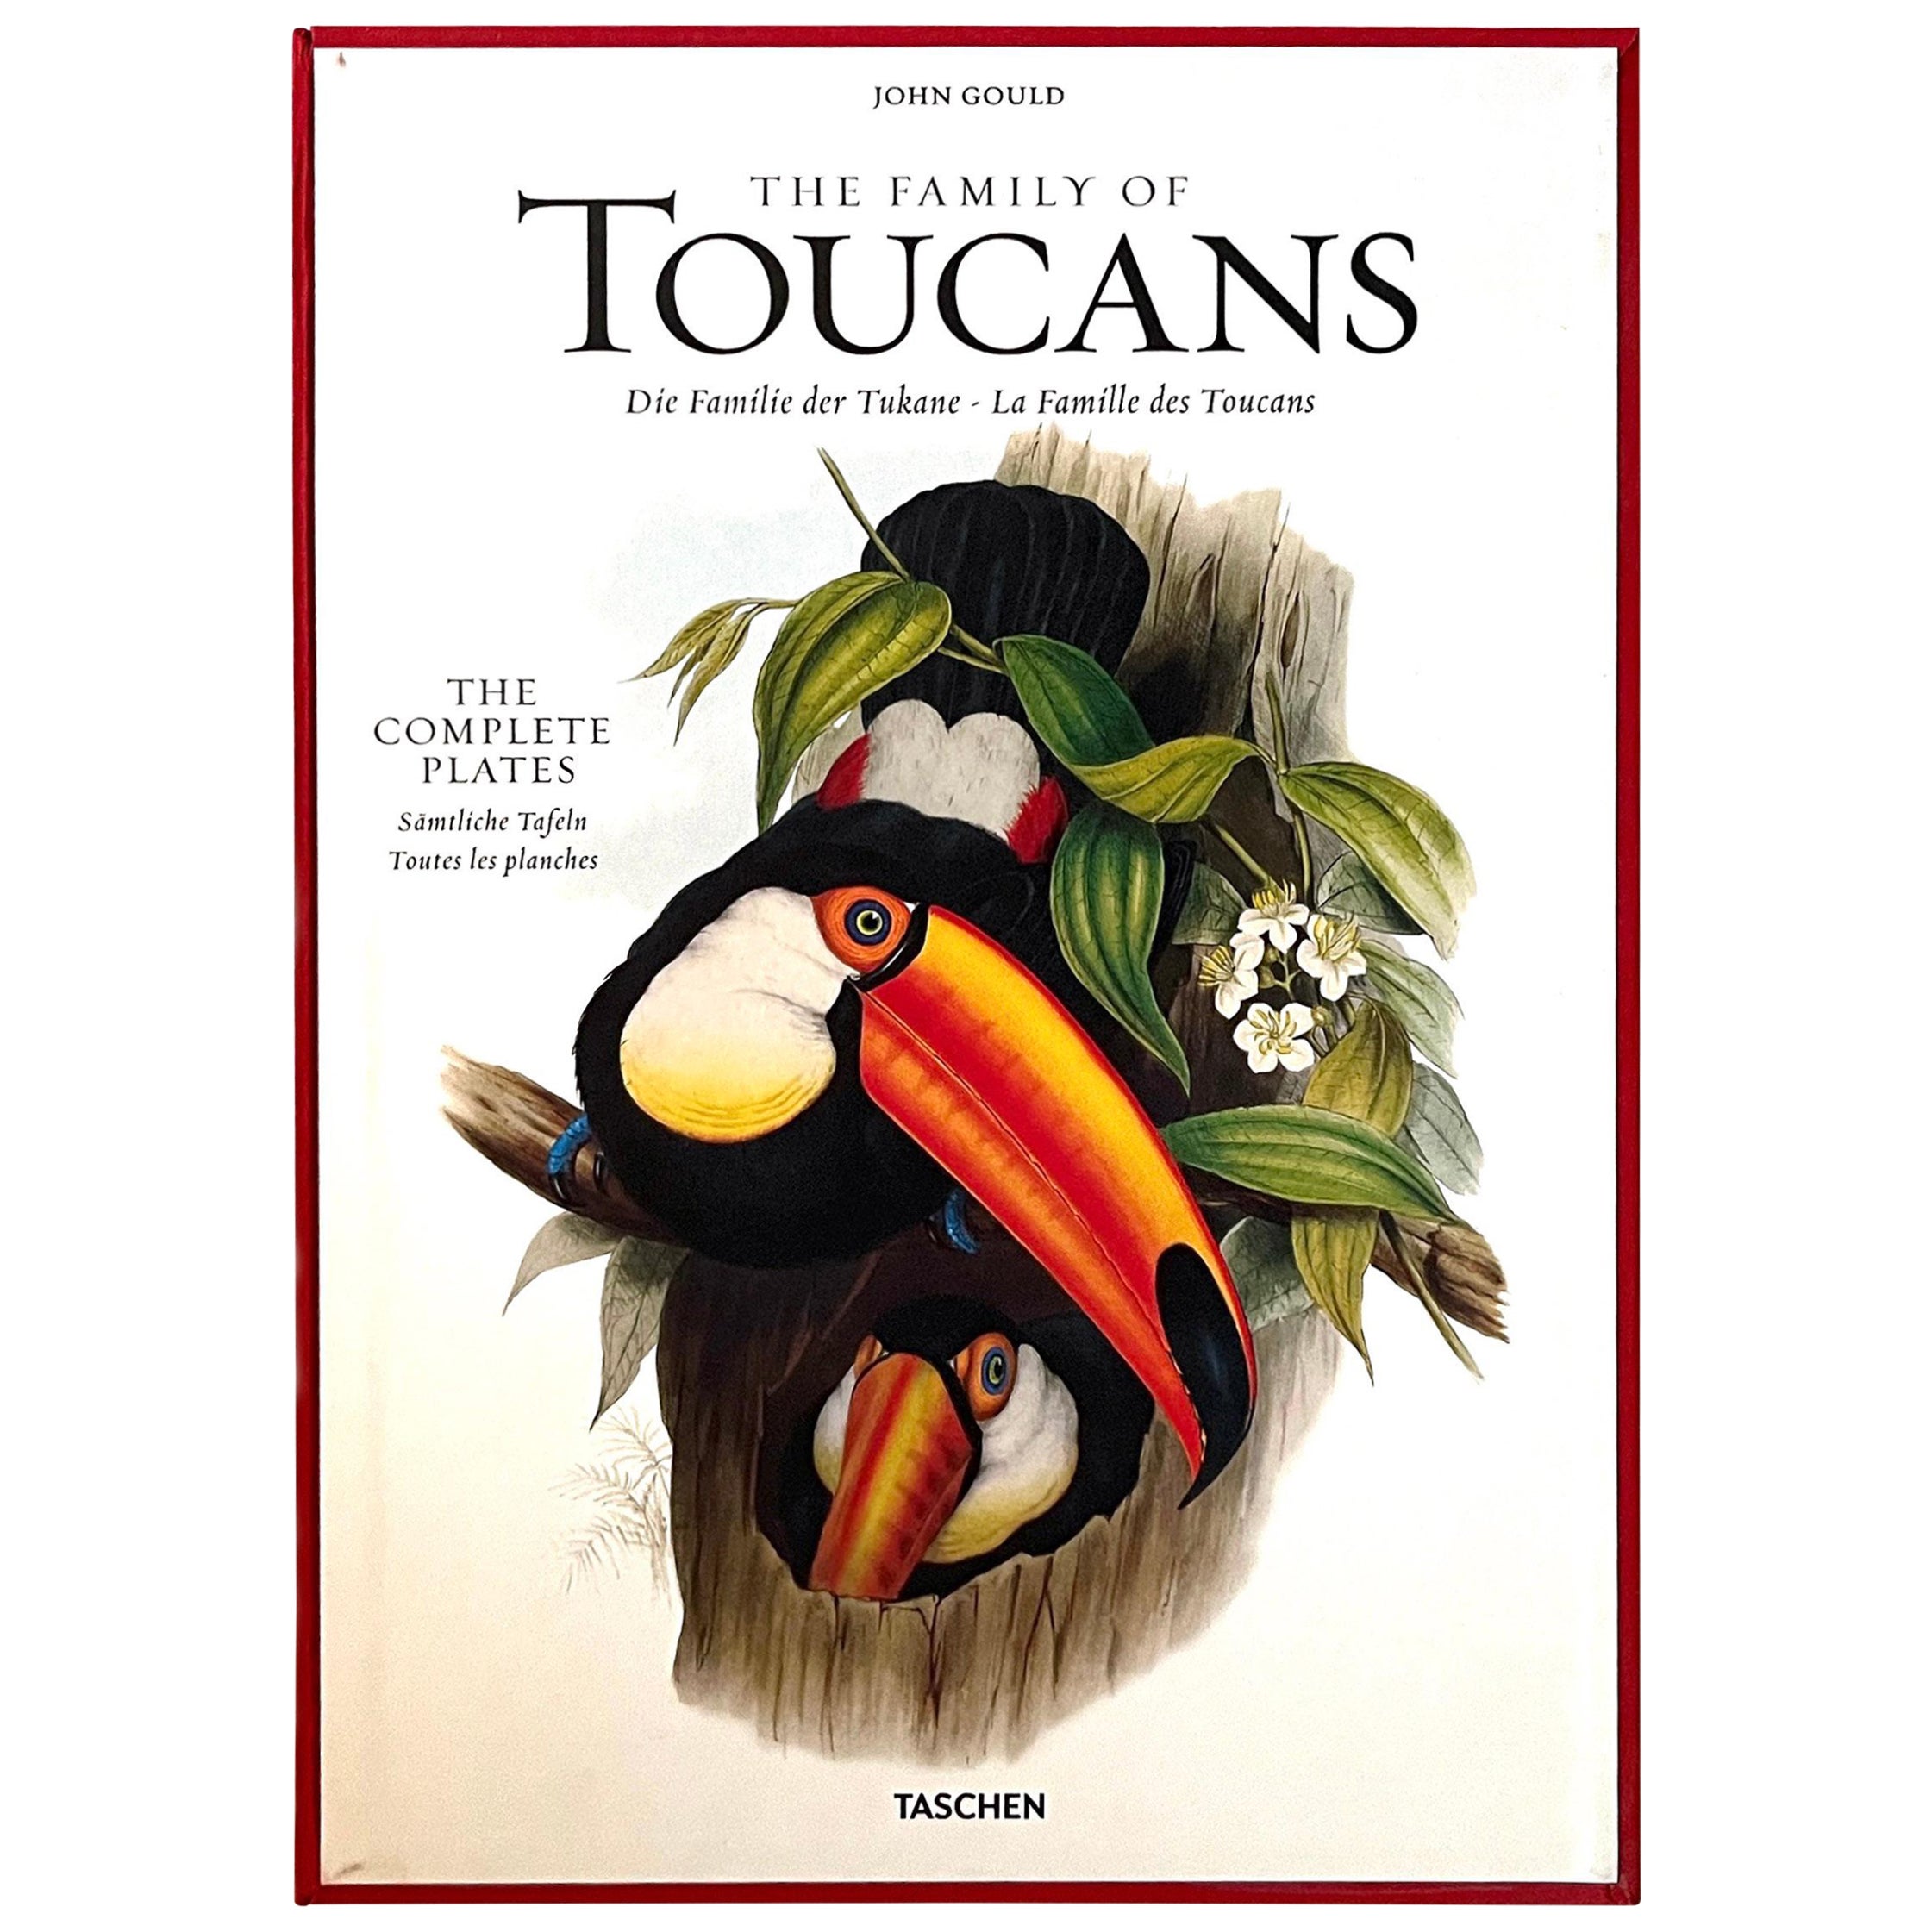 The Family of Toucans: The Complete Plates by John Gould, Pub. by Taschen, 2011 For Sale